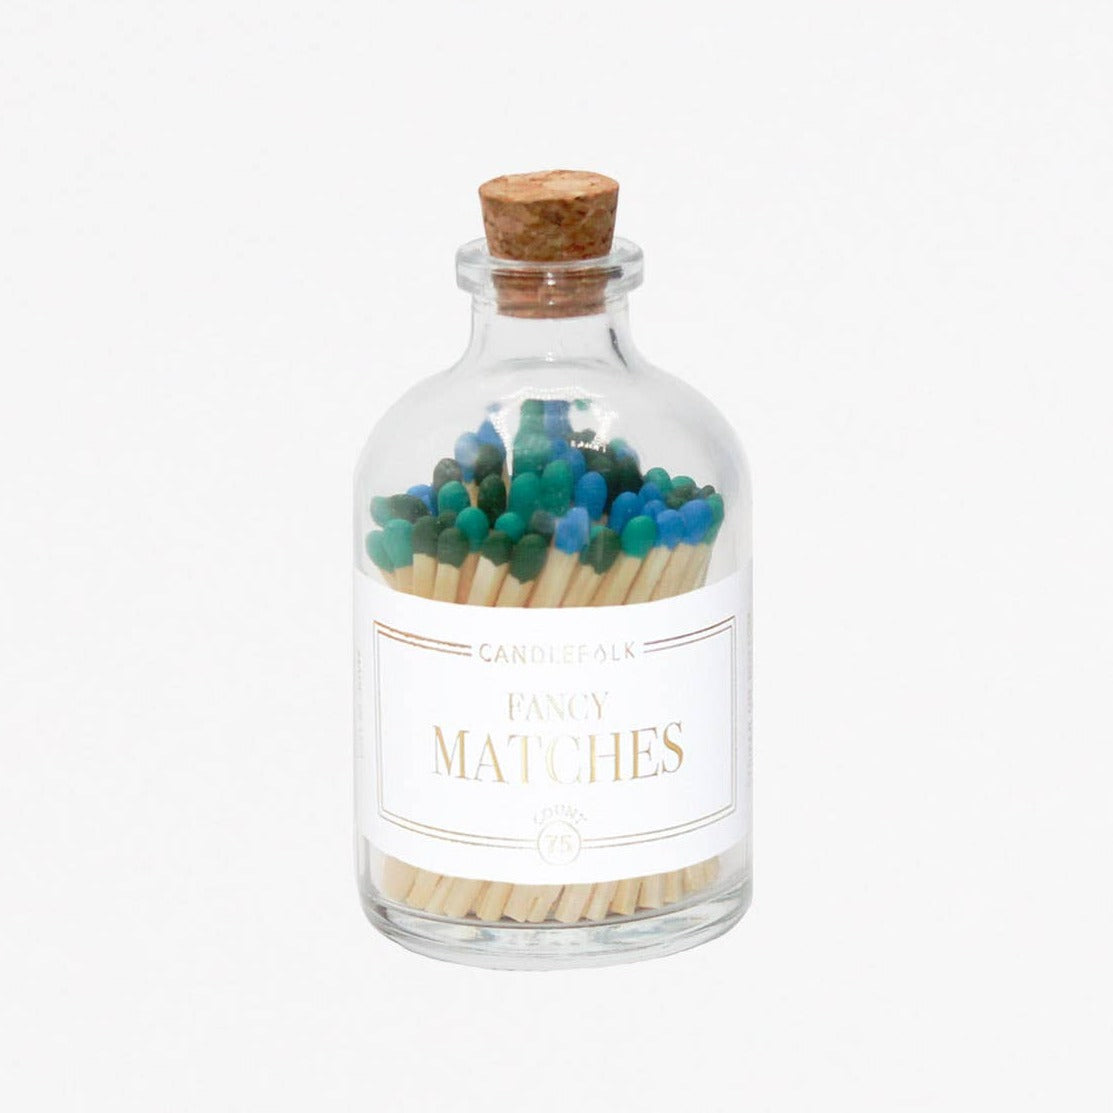 Multi-Colored Cools Apothecary Matches